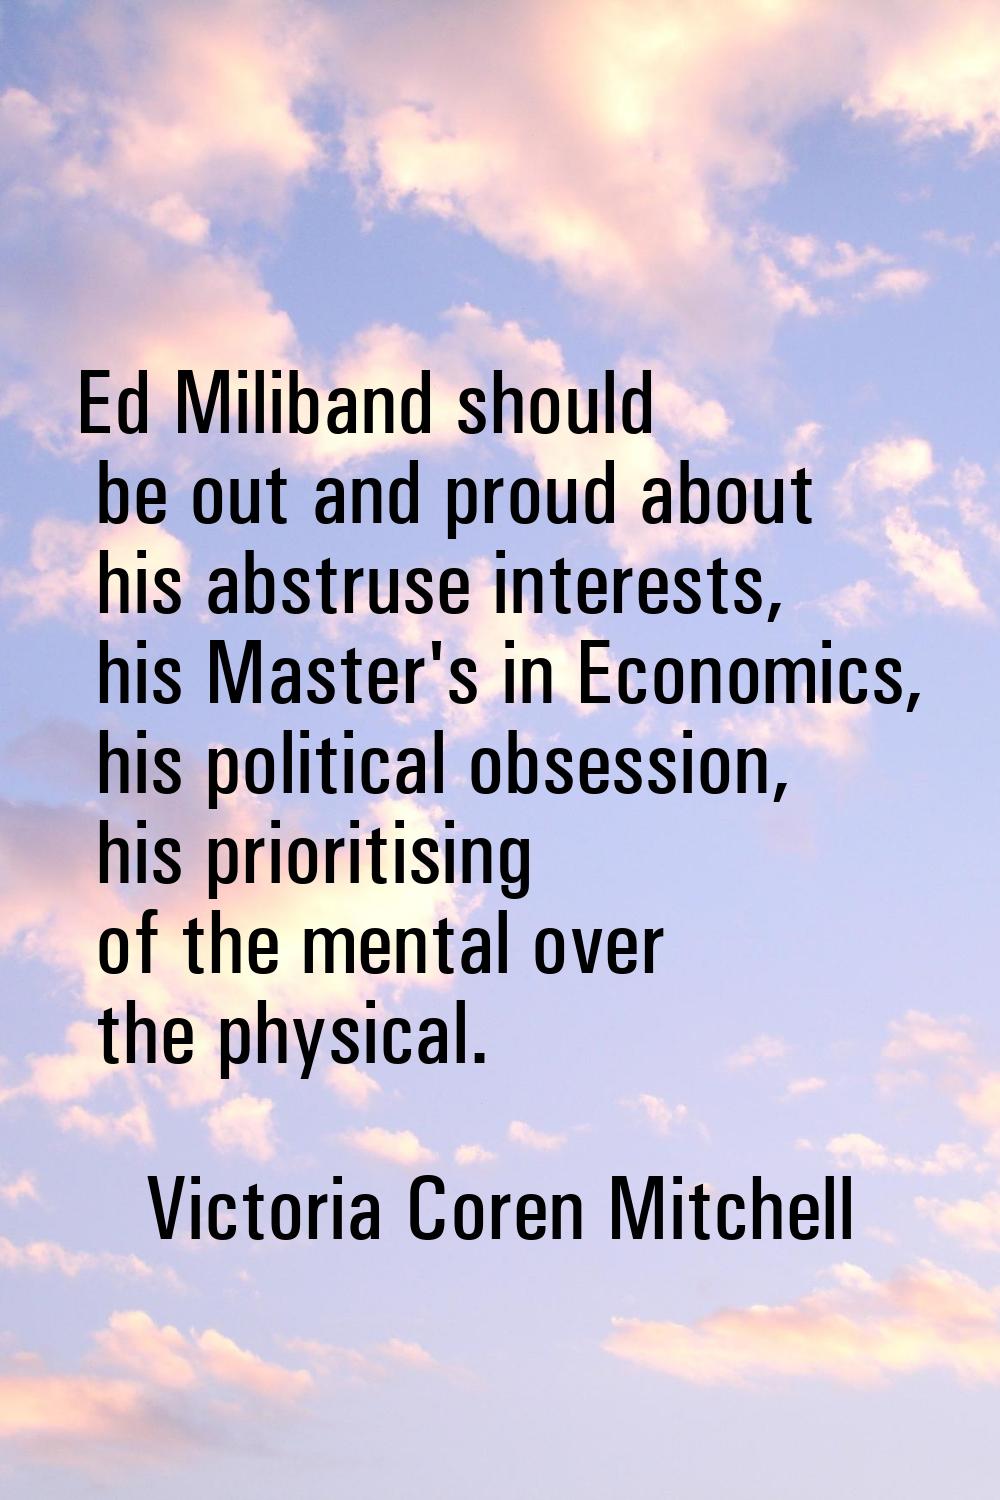 Ed Miliband should be out and proud about his abstruse interests, his Master's in Economics, his po